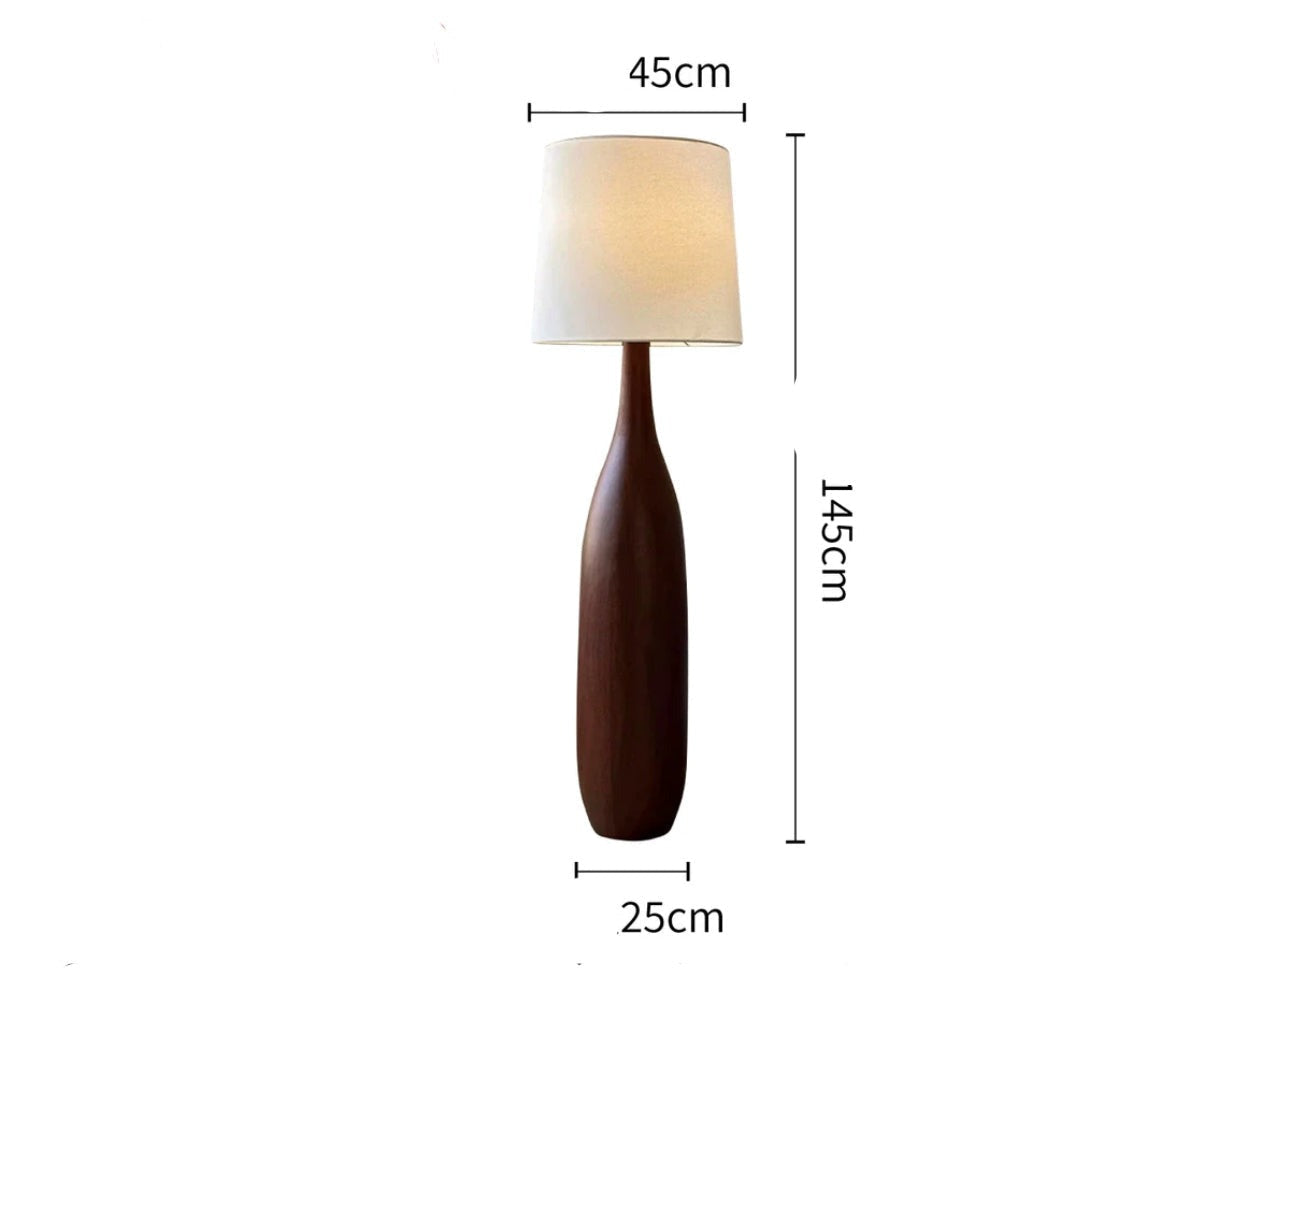 Resin Floor Lamp With Fabric Lampshade - Contemporary Design Warm Ambient Light - Minimalist Floor Lamps